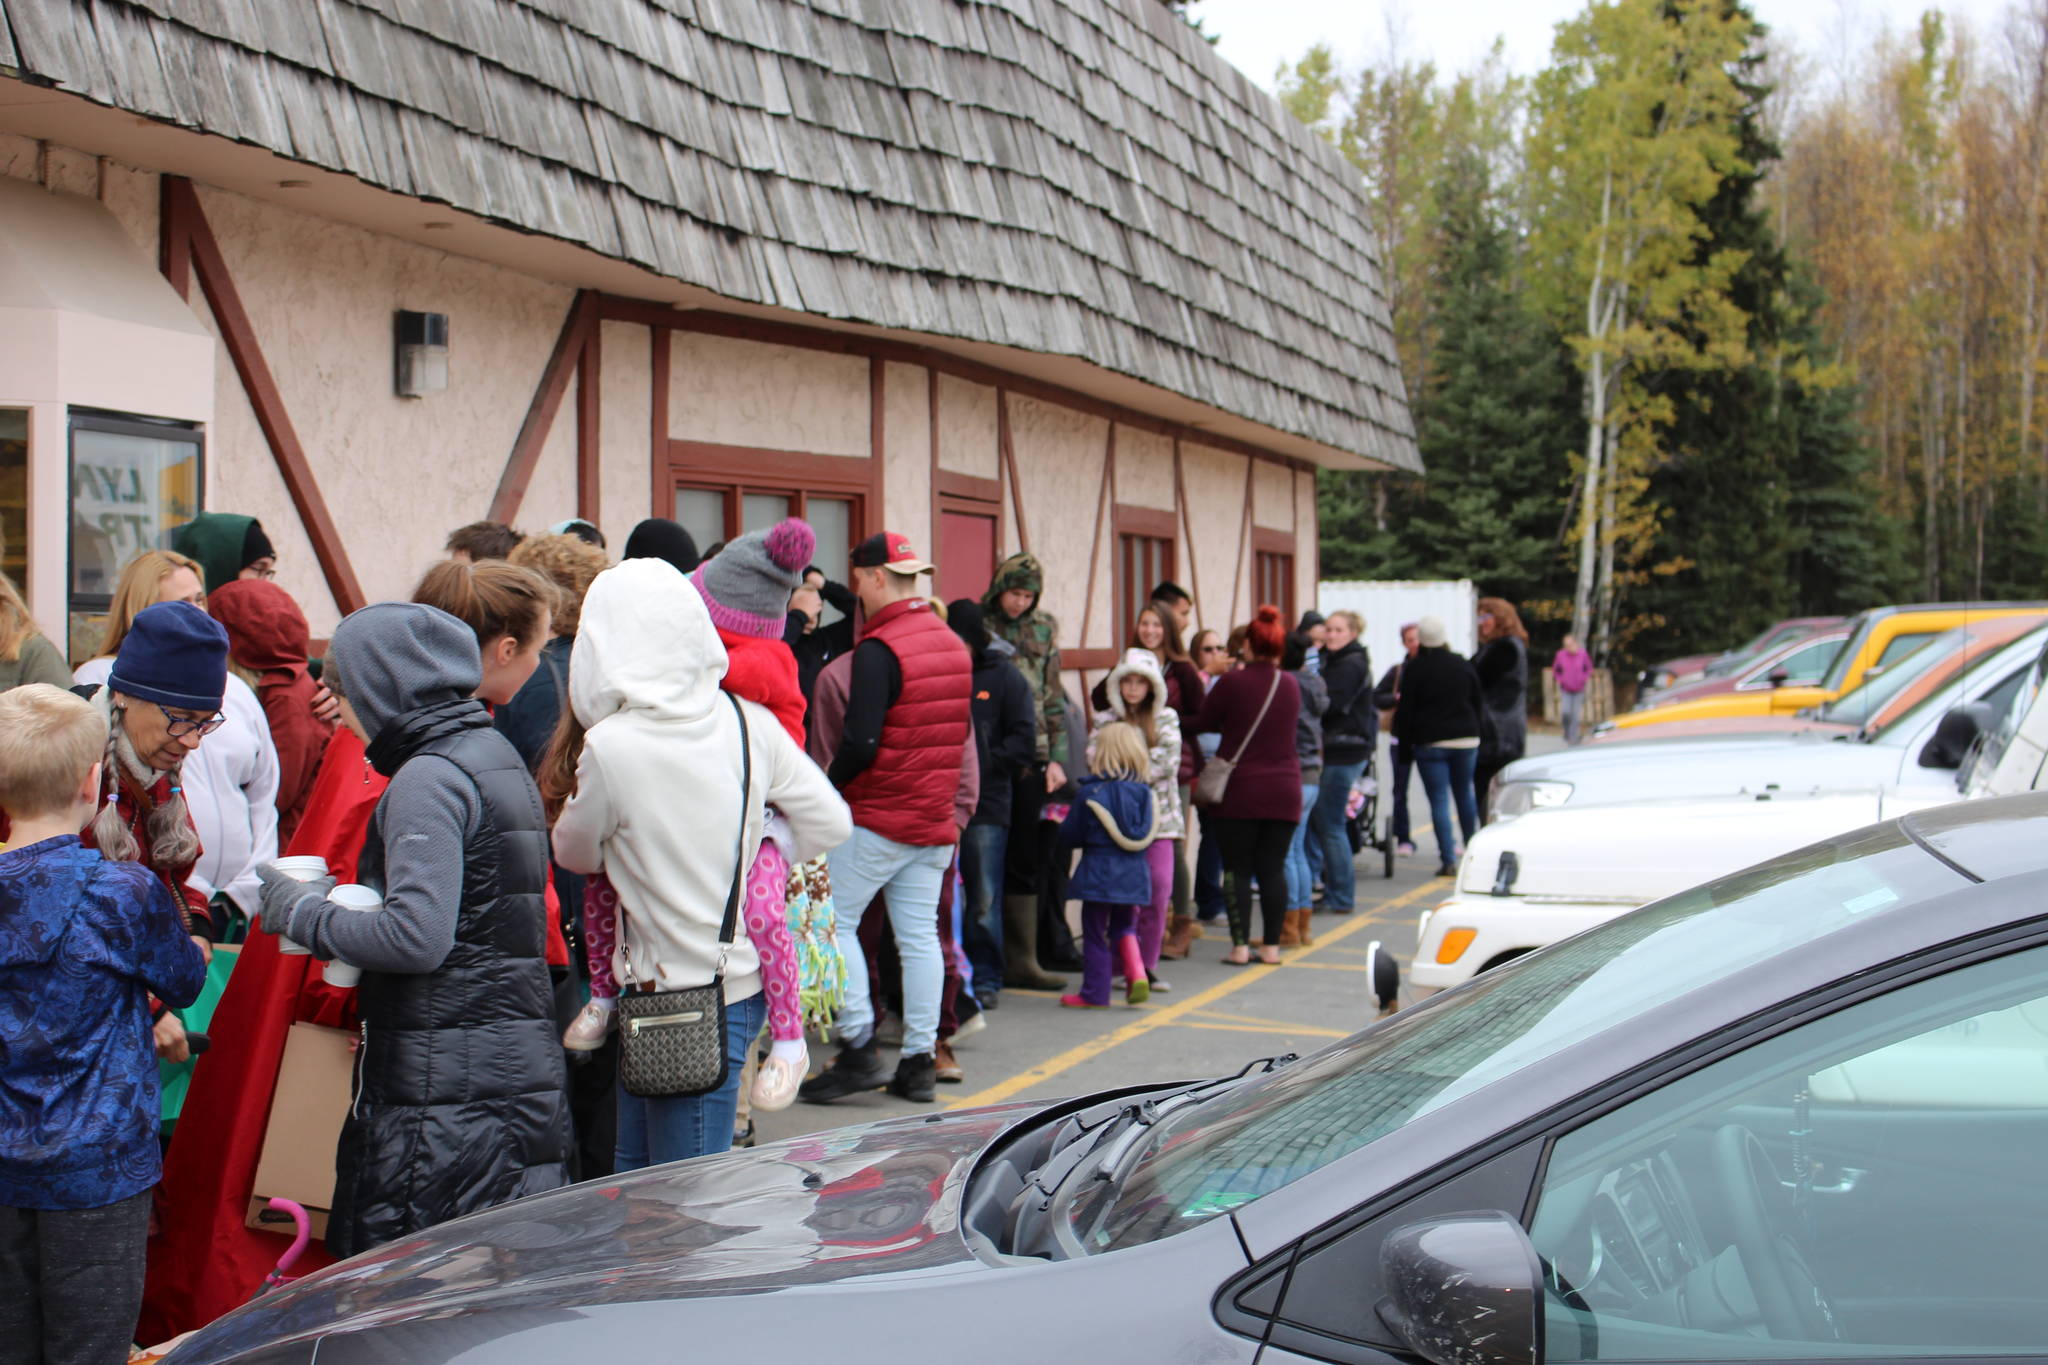 The line outside of the Moose is Loose Bakery can be seen here on their last day of business in Soldotna, Alaska on Sept. 28, 2019. (Photo by Brian Mazurek/Peninsula Clarion)